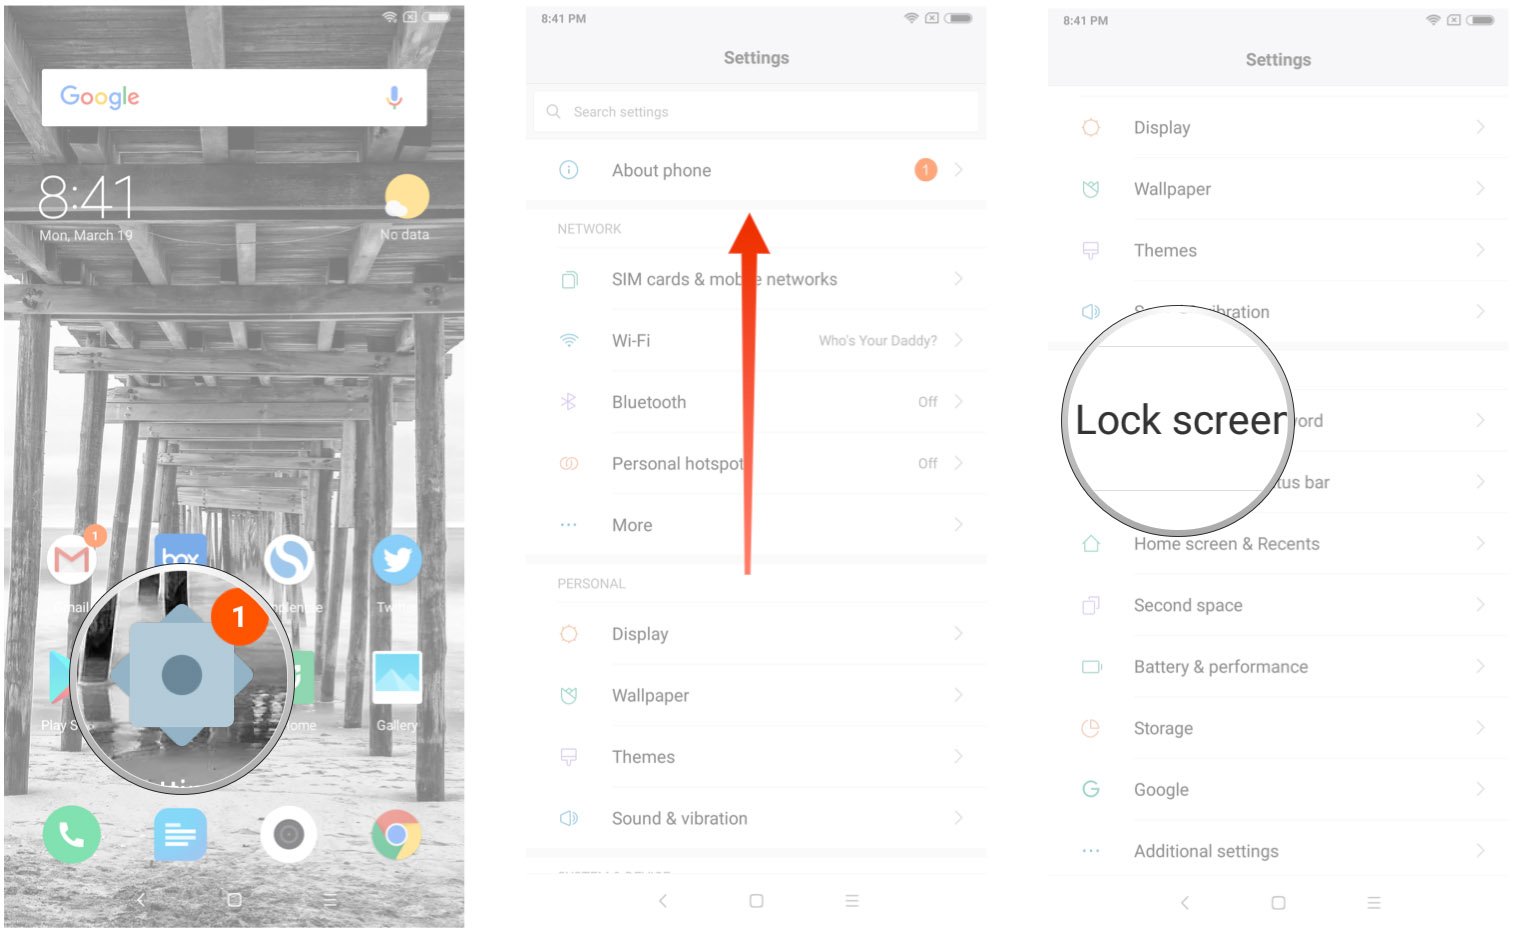 How to change the screen timeout option in MIUI